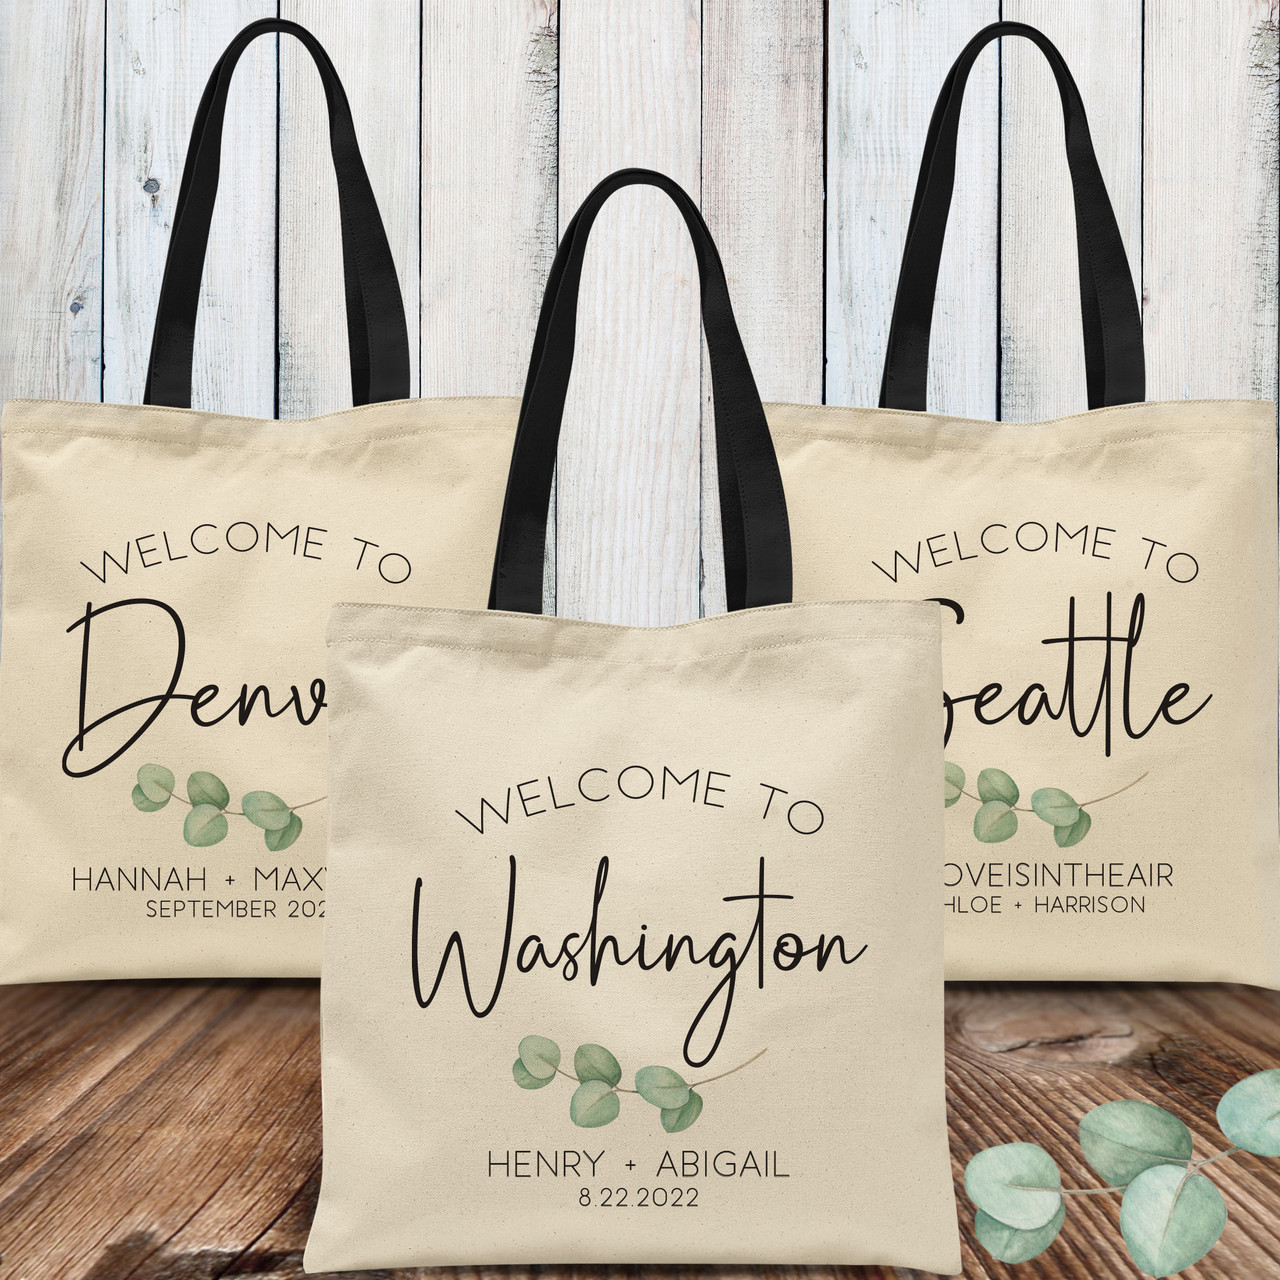 53 Phrases for Your Wedding Welcome Bags | by My Wedding Reception Ideas |  Medium